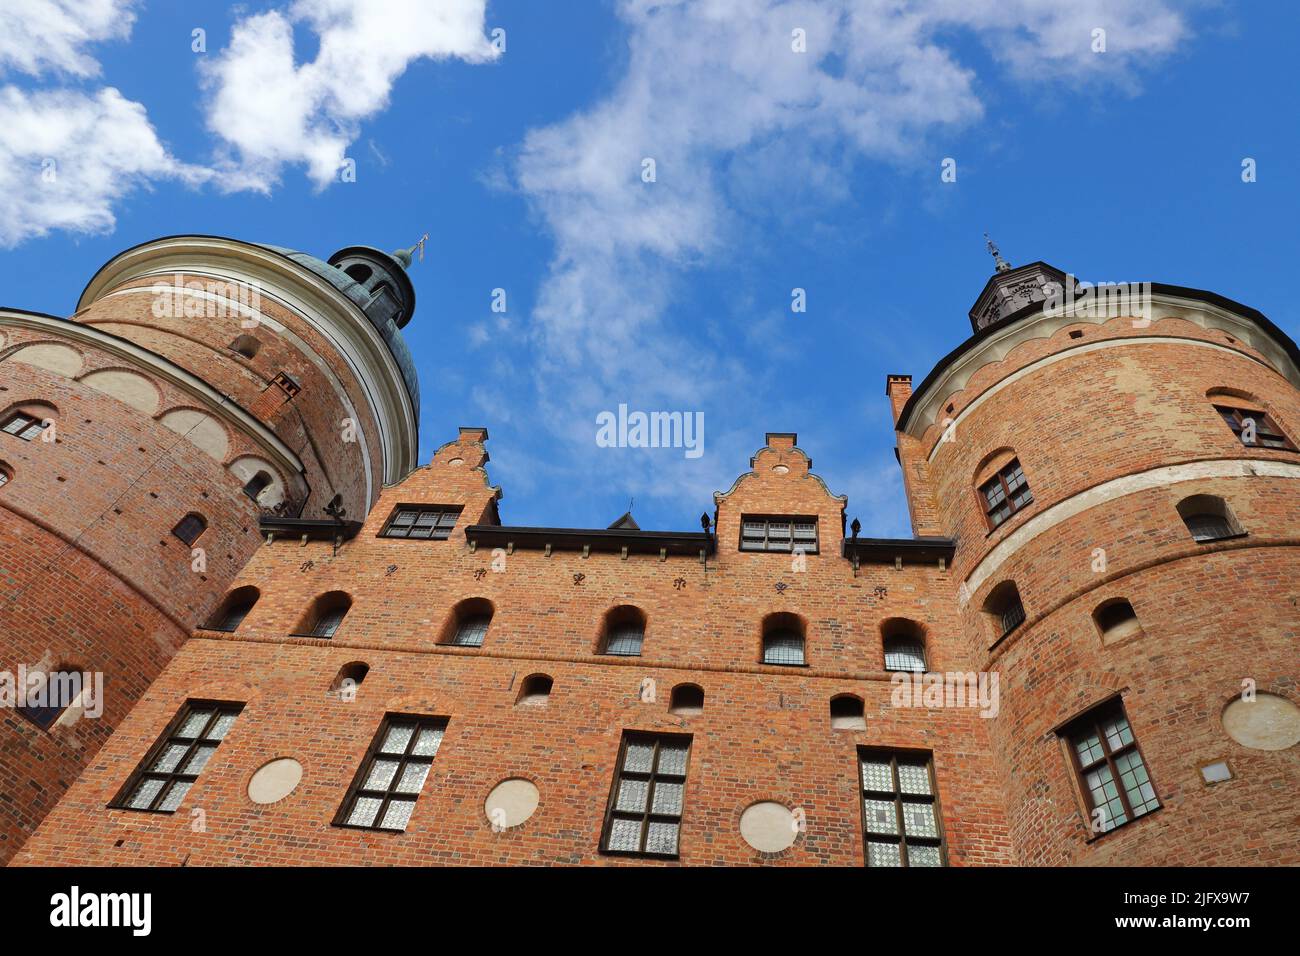 Low angle view of the 16th century Gripsholm castle located in Swedish province of Sodermanland. Stock Photo